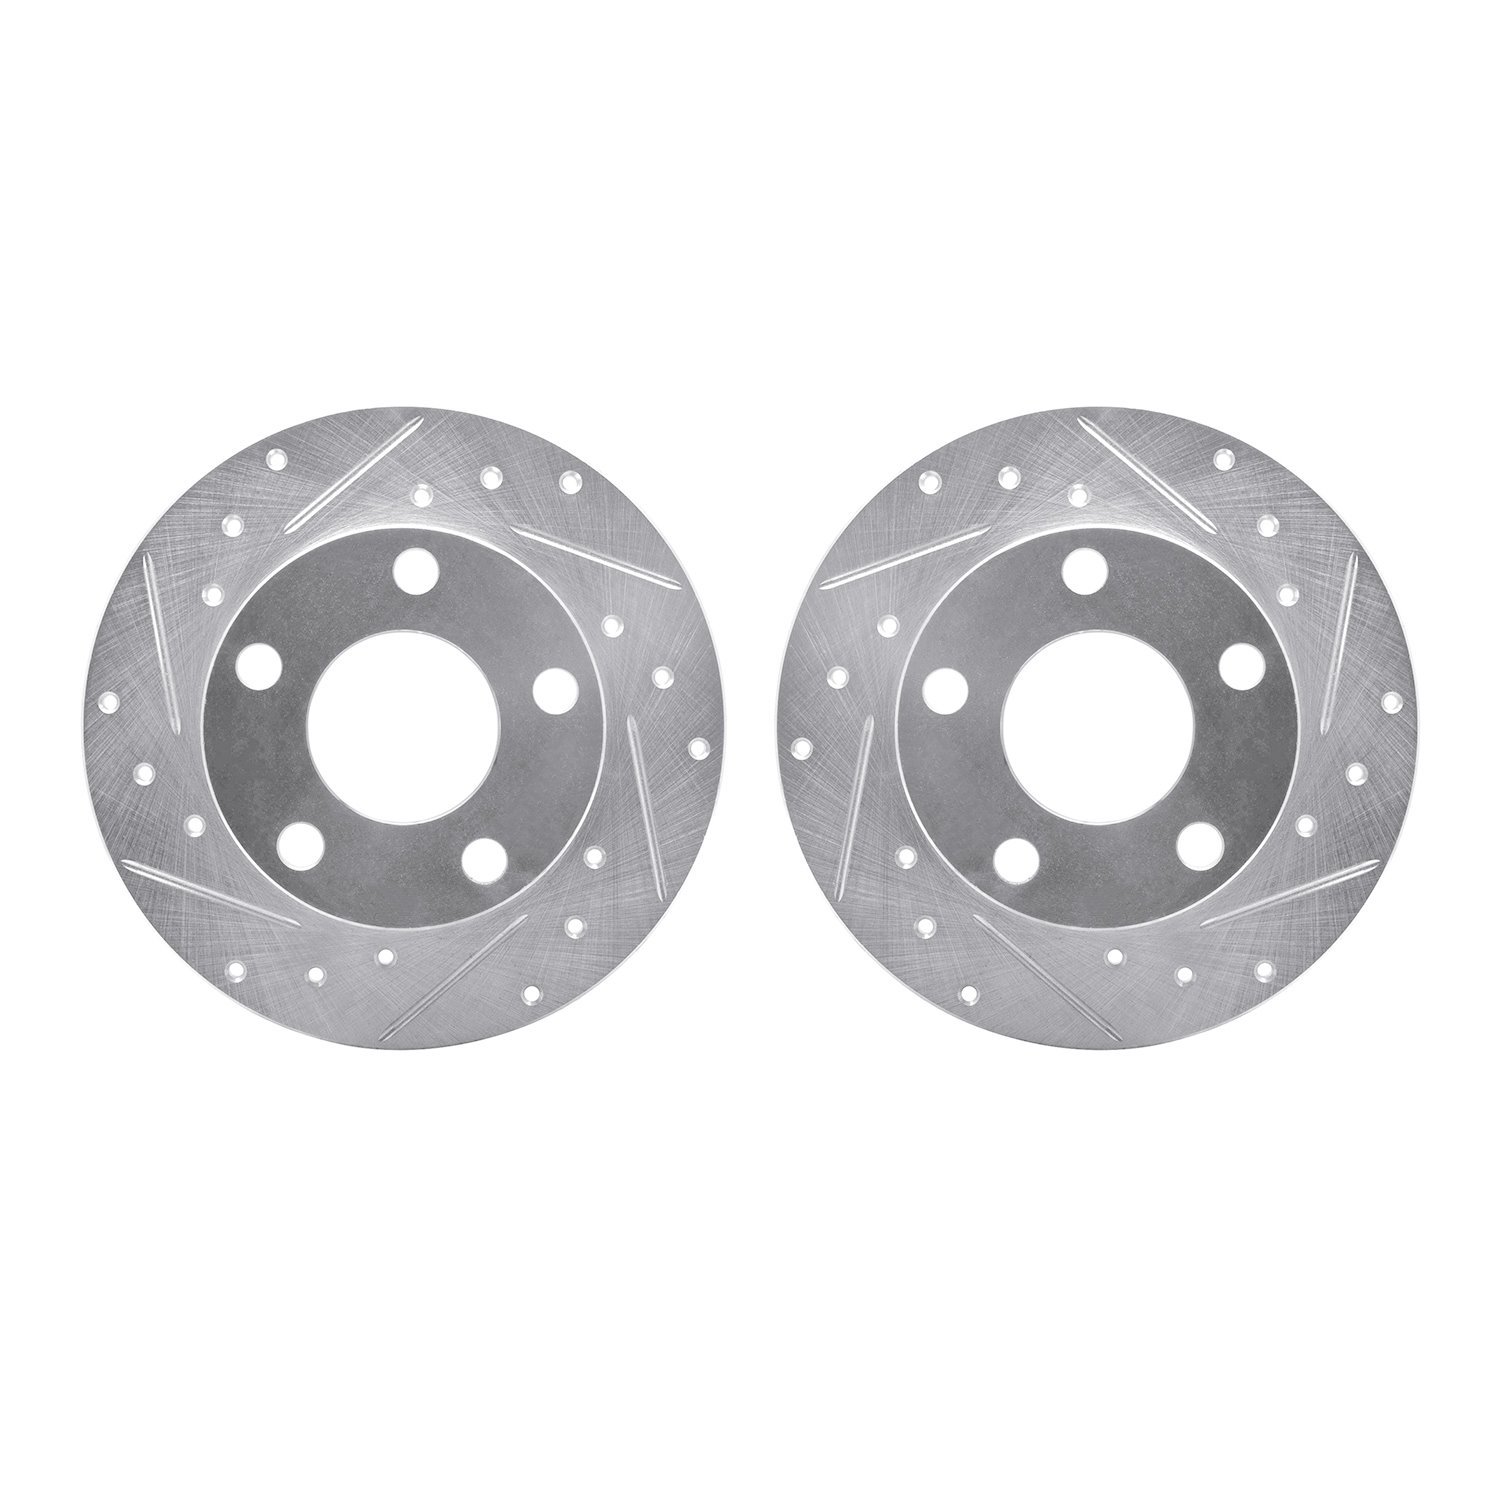 7002-73054 Drilled/Slotted Brake Rotors [Silver], 1998-2001 Audi/Volkswagen, Position: Rear